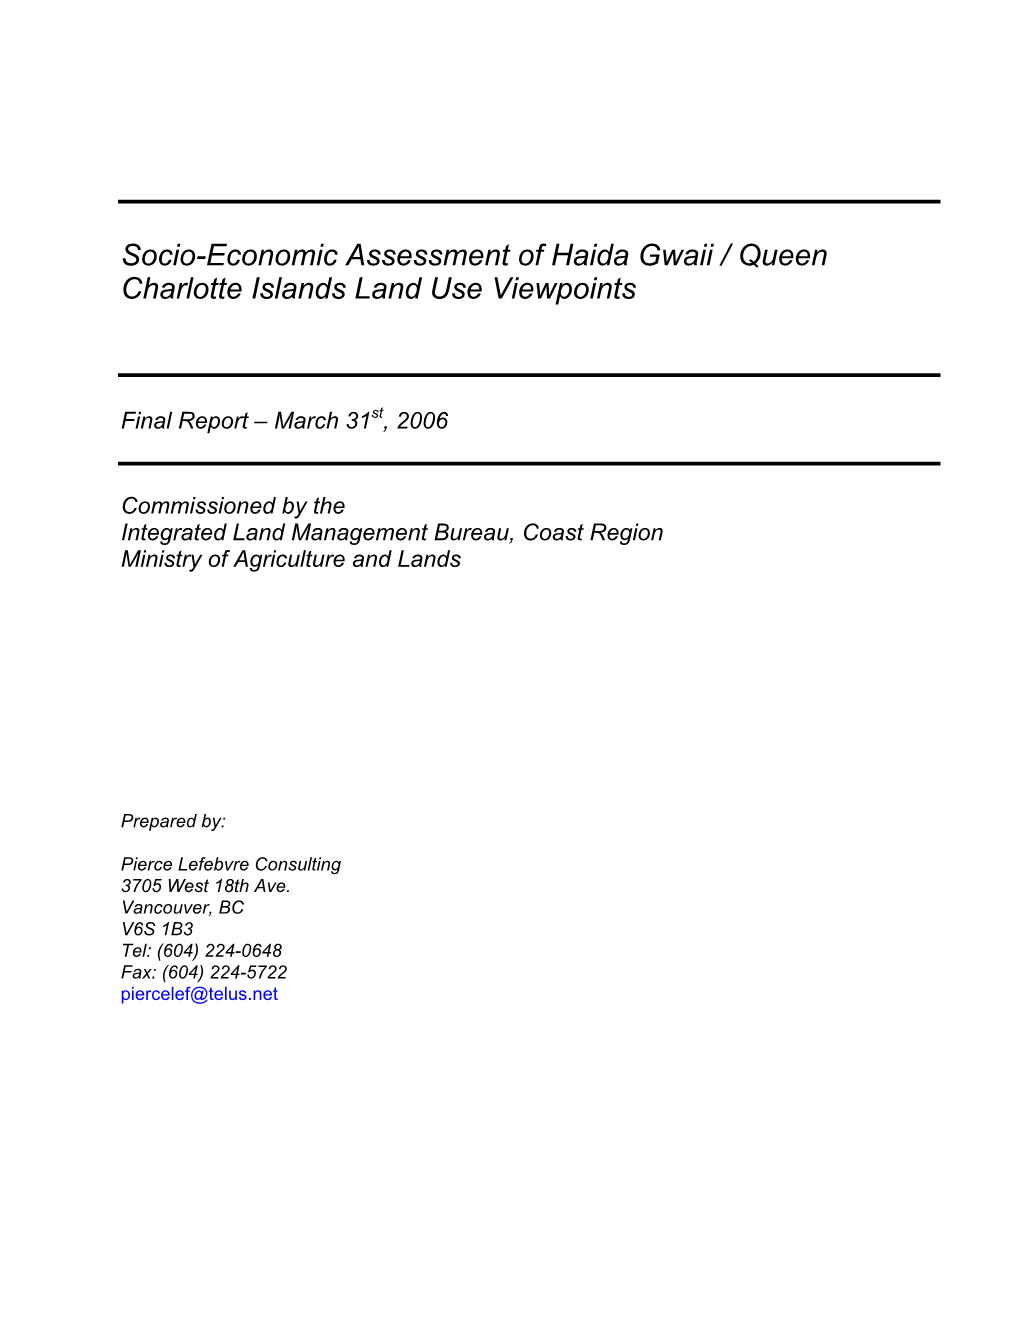 Socio-Economic Assessment of Haida Gwaii / Queen Charlotte Islands Land Use Viewpoints